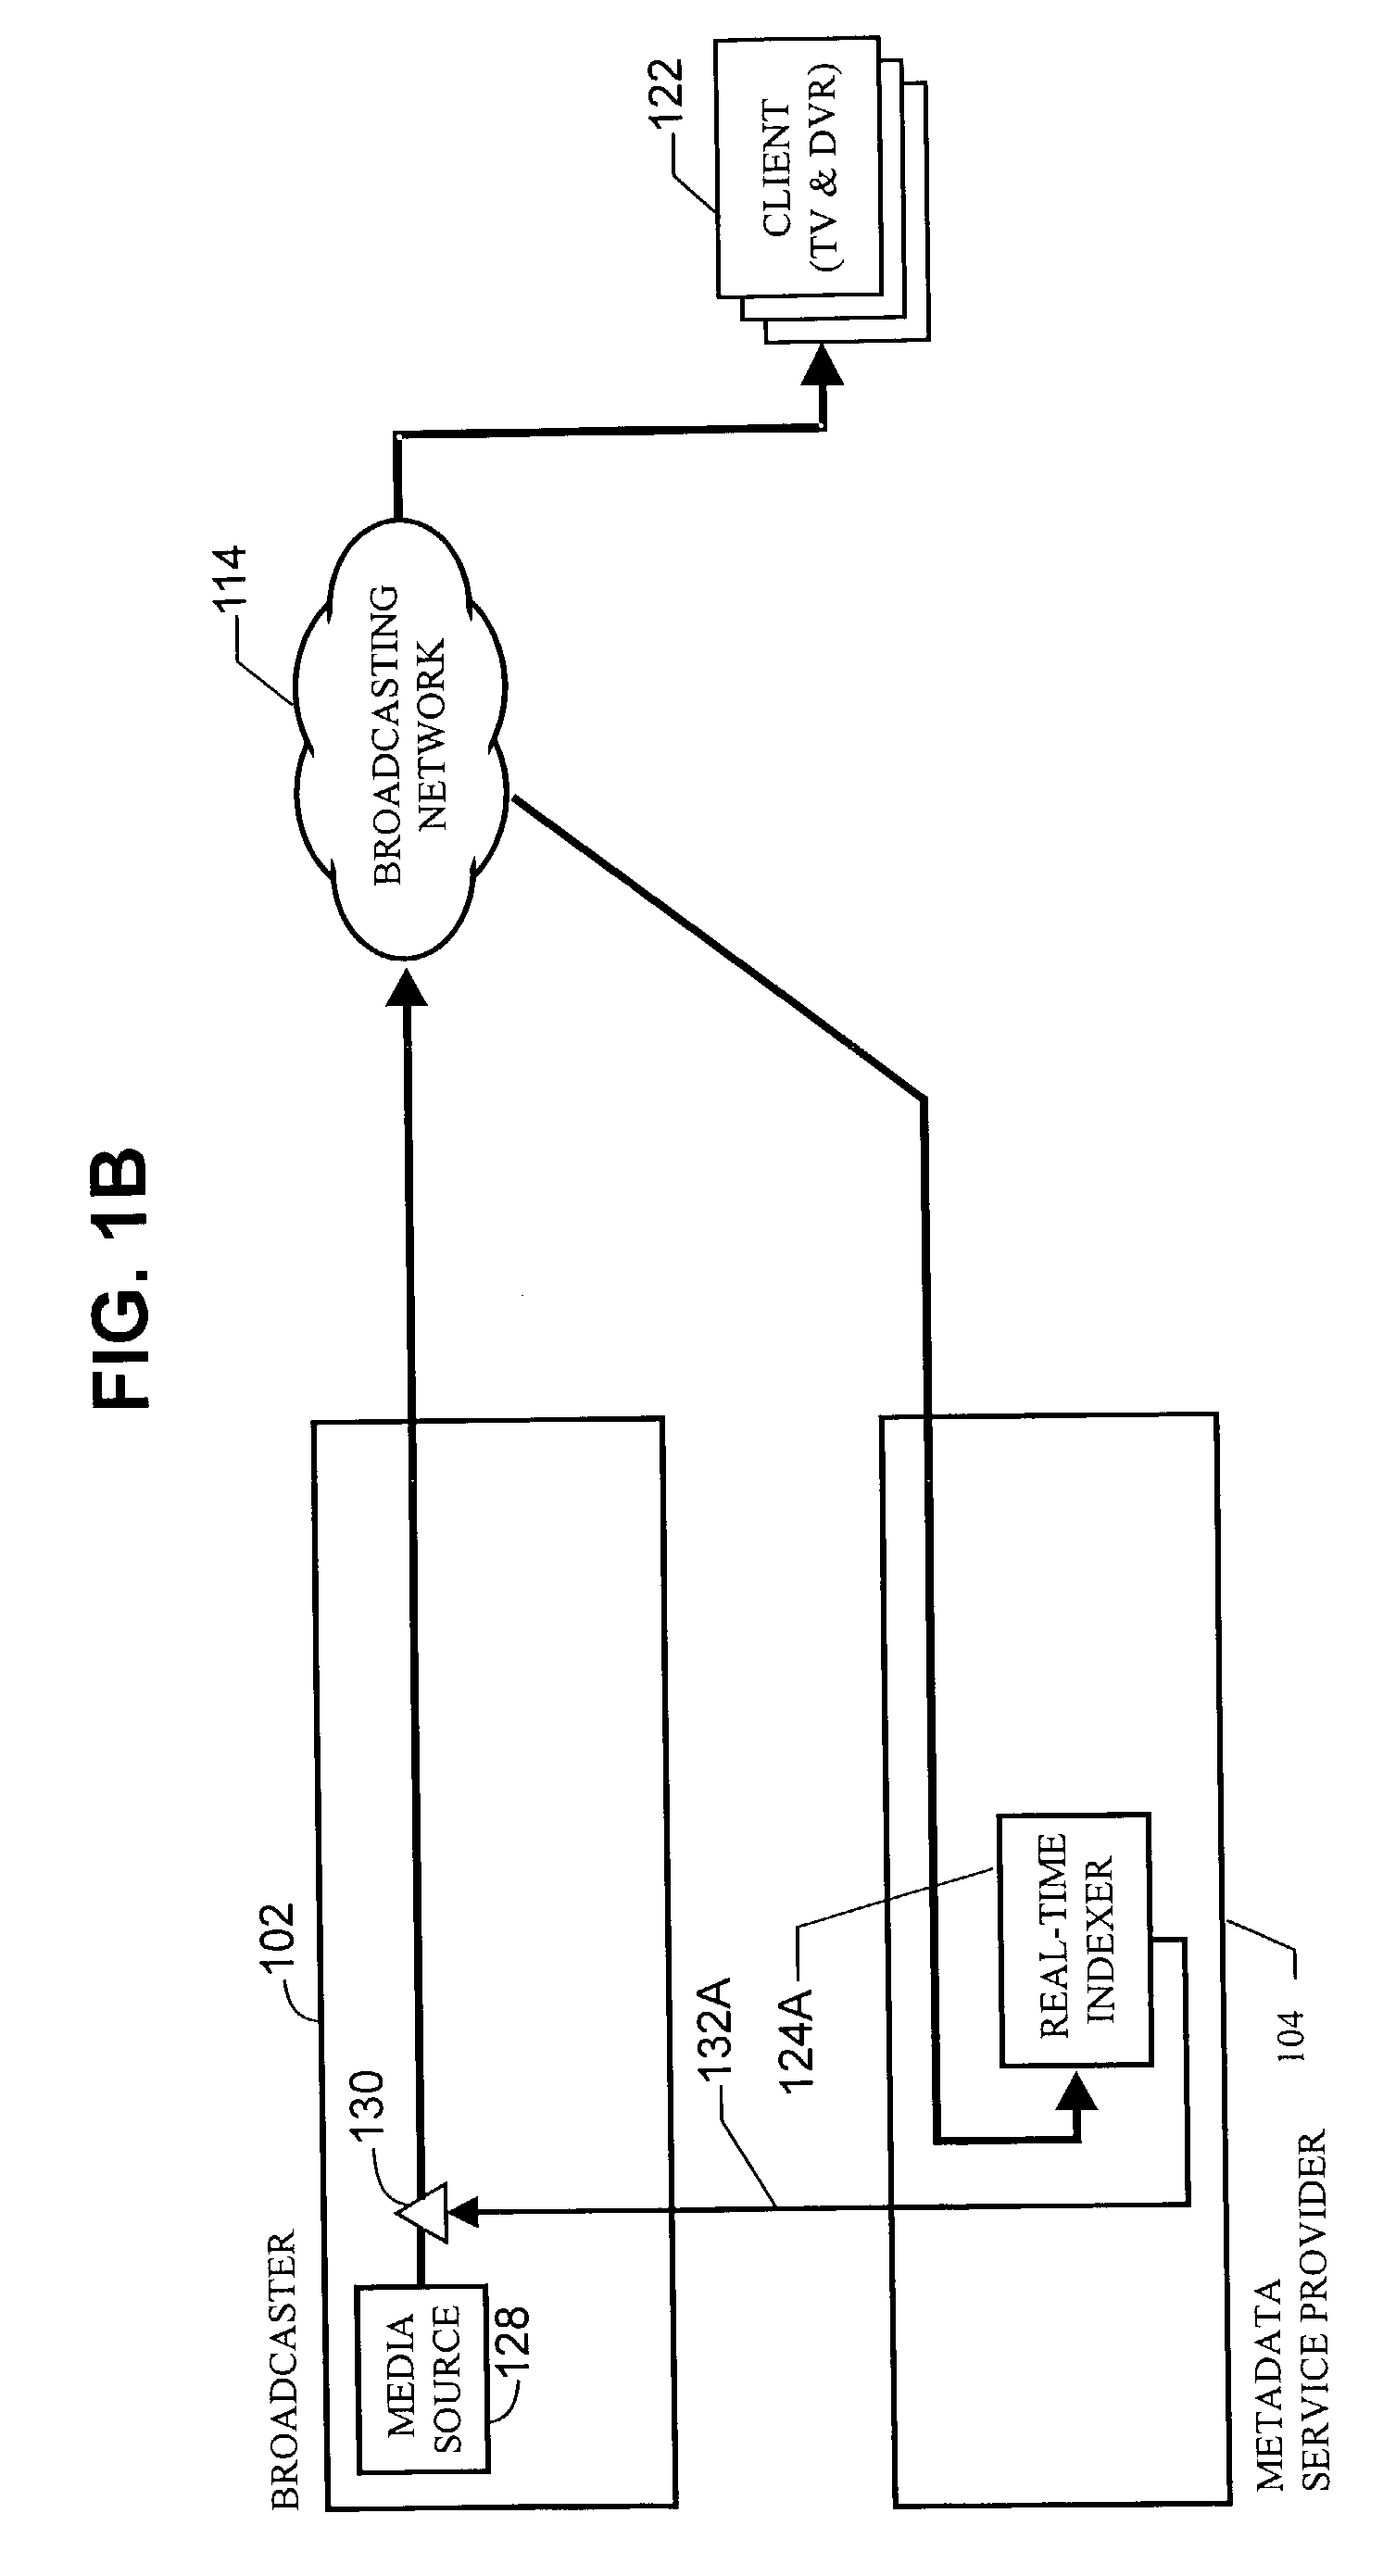 Method and apparatus for fast metadata generation, delivery and access for live broadcast program